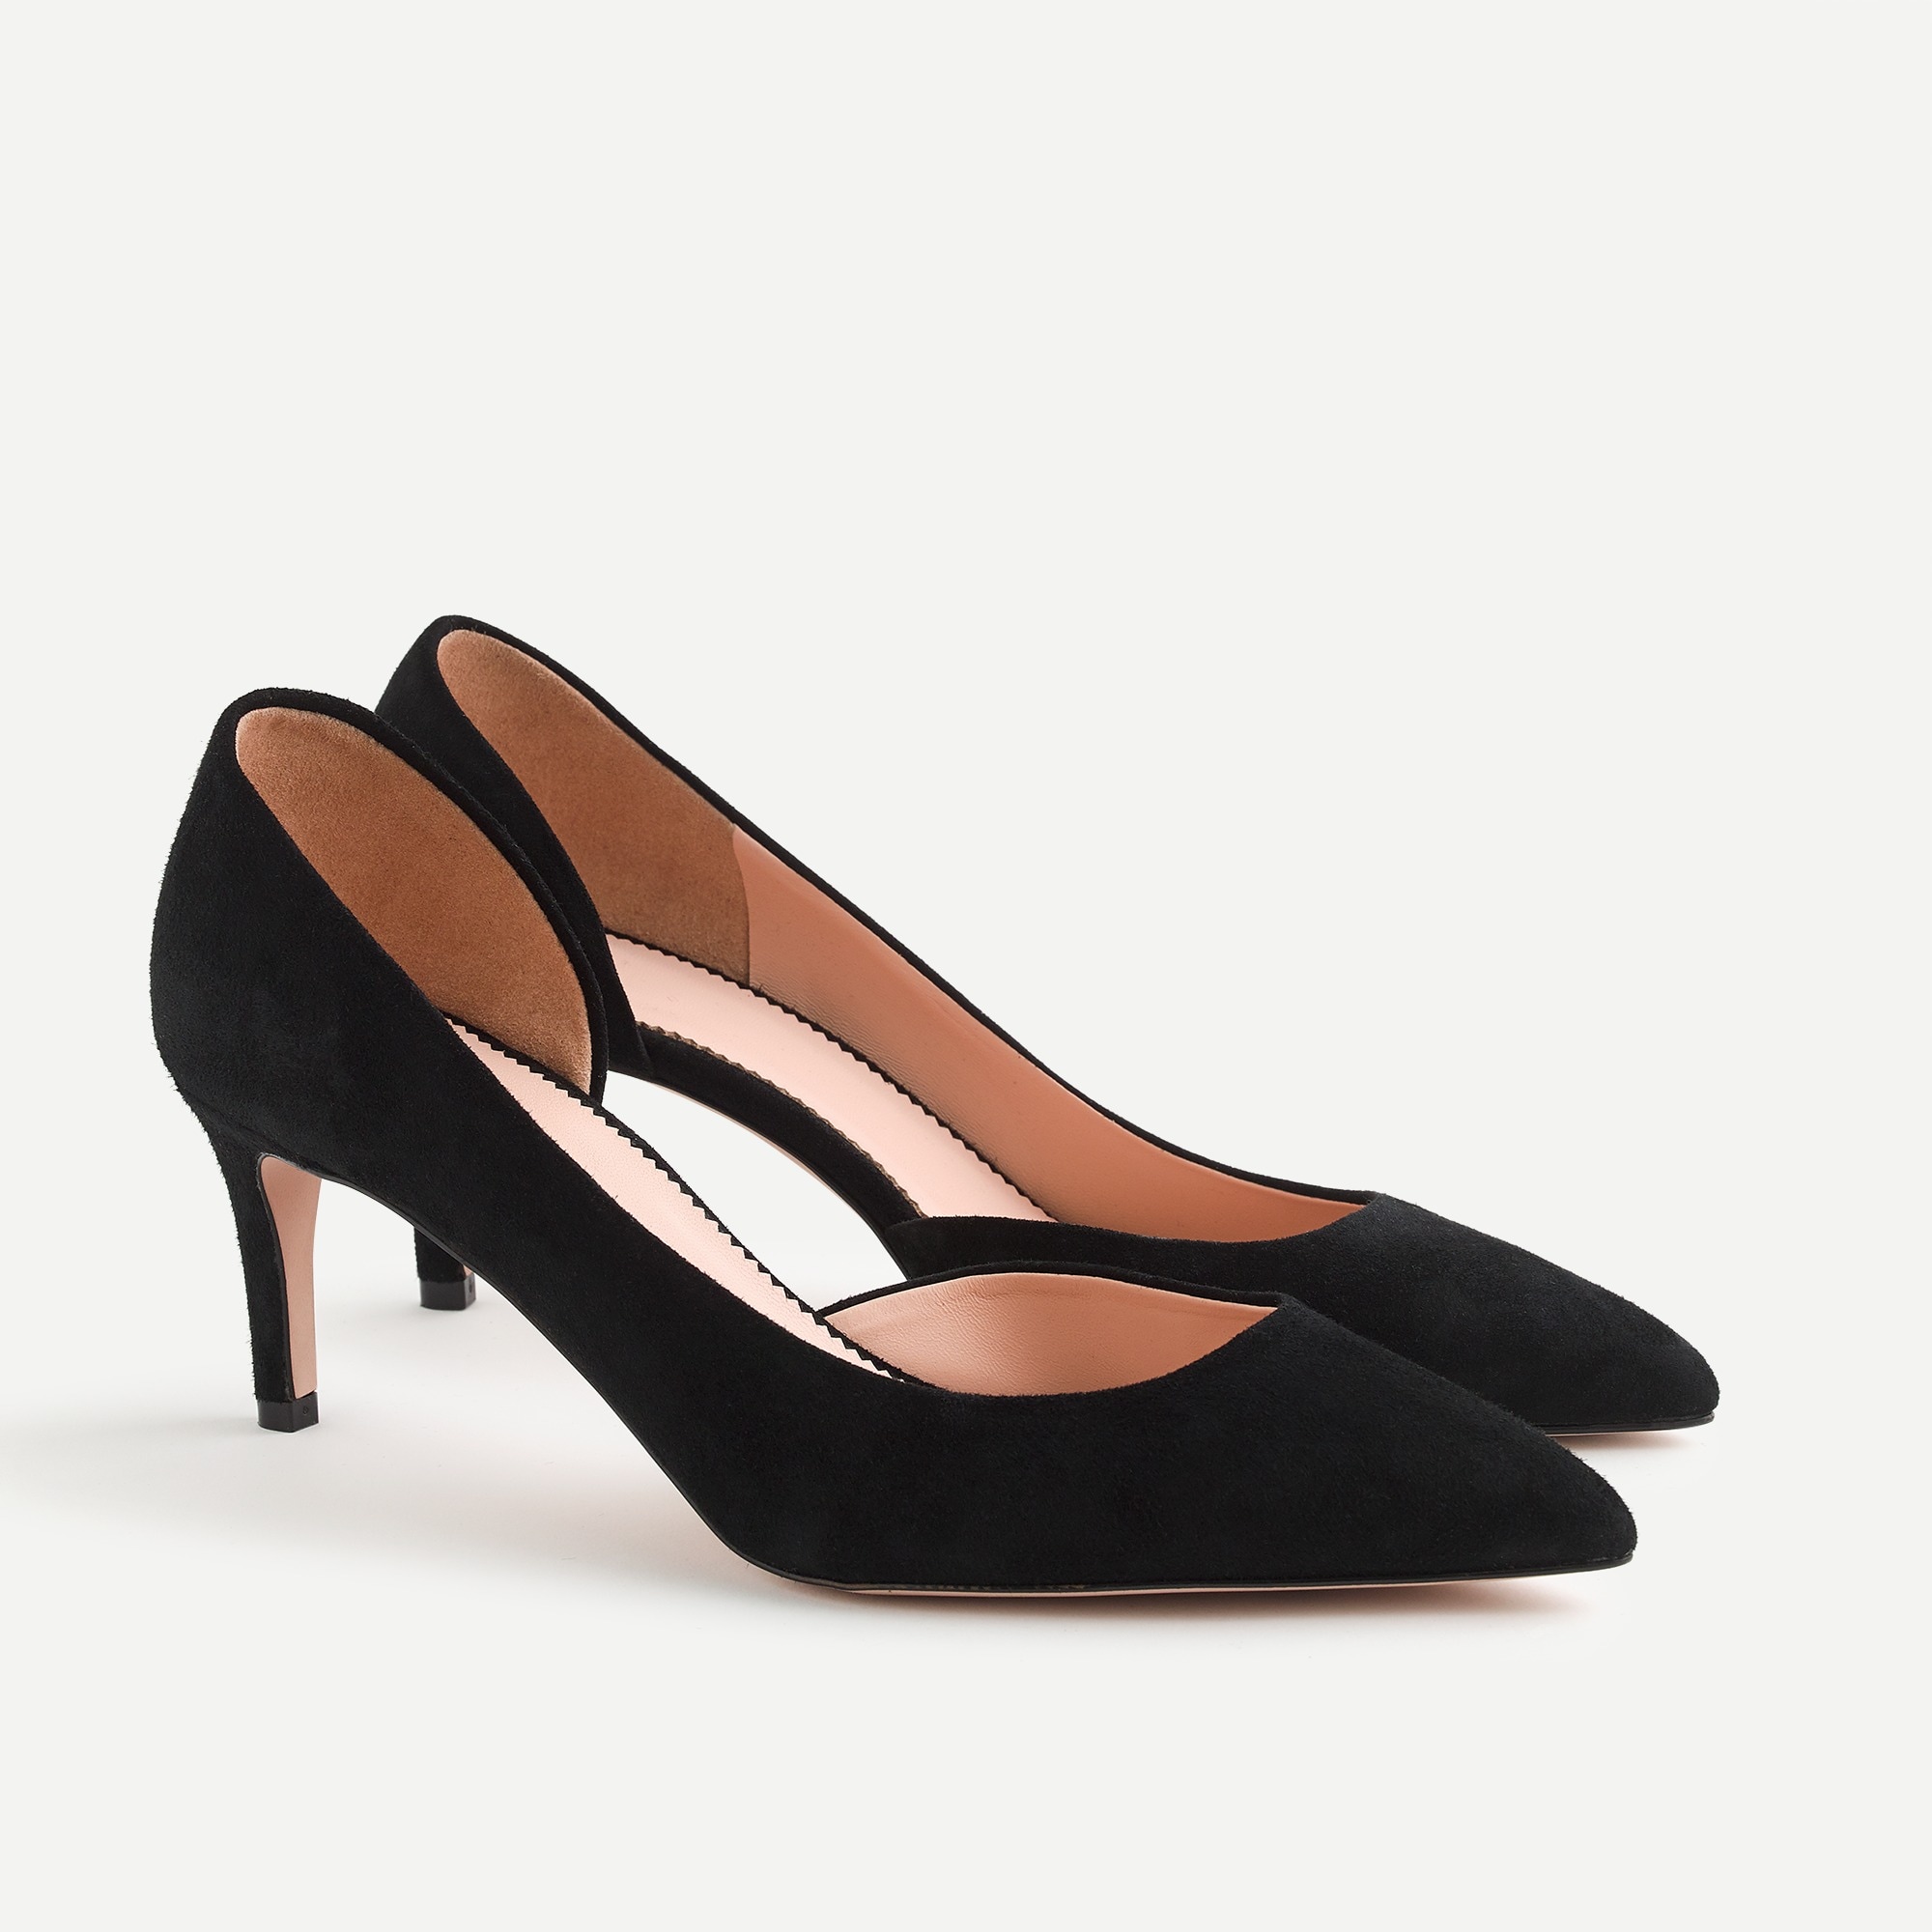 J.Crew: Lucie Suede Pumps For Women